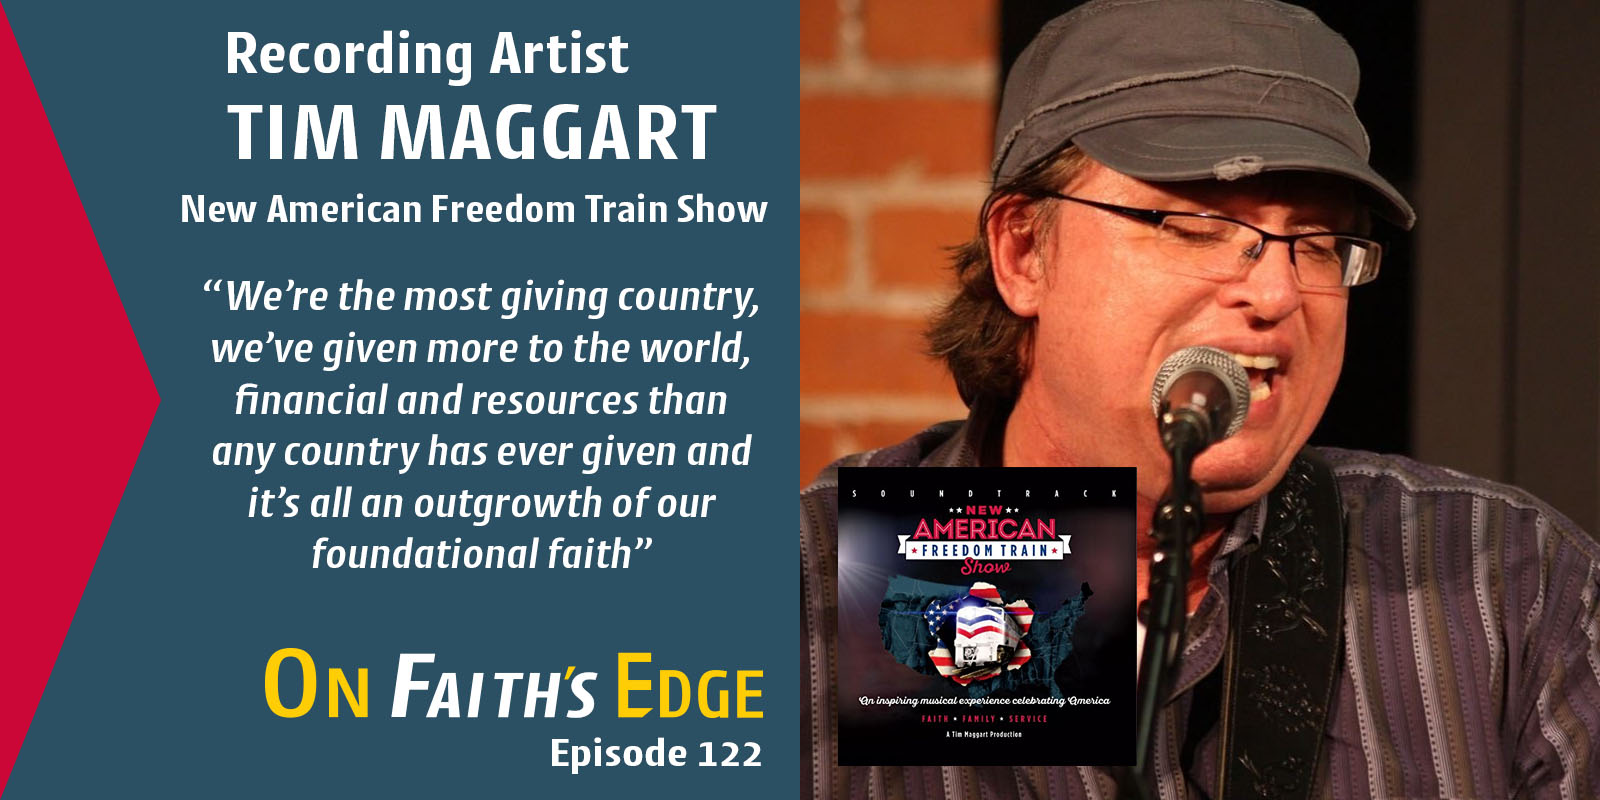 Patriotism, Founders, and the Freedom Train | Recording Artist Tim Maggart